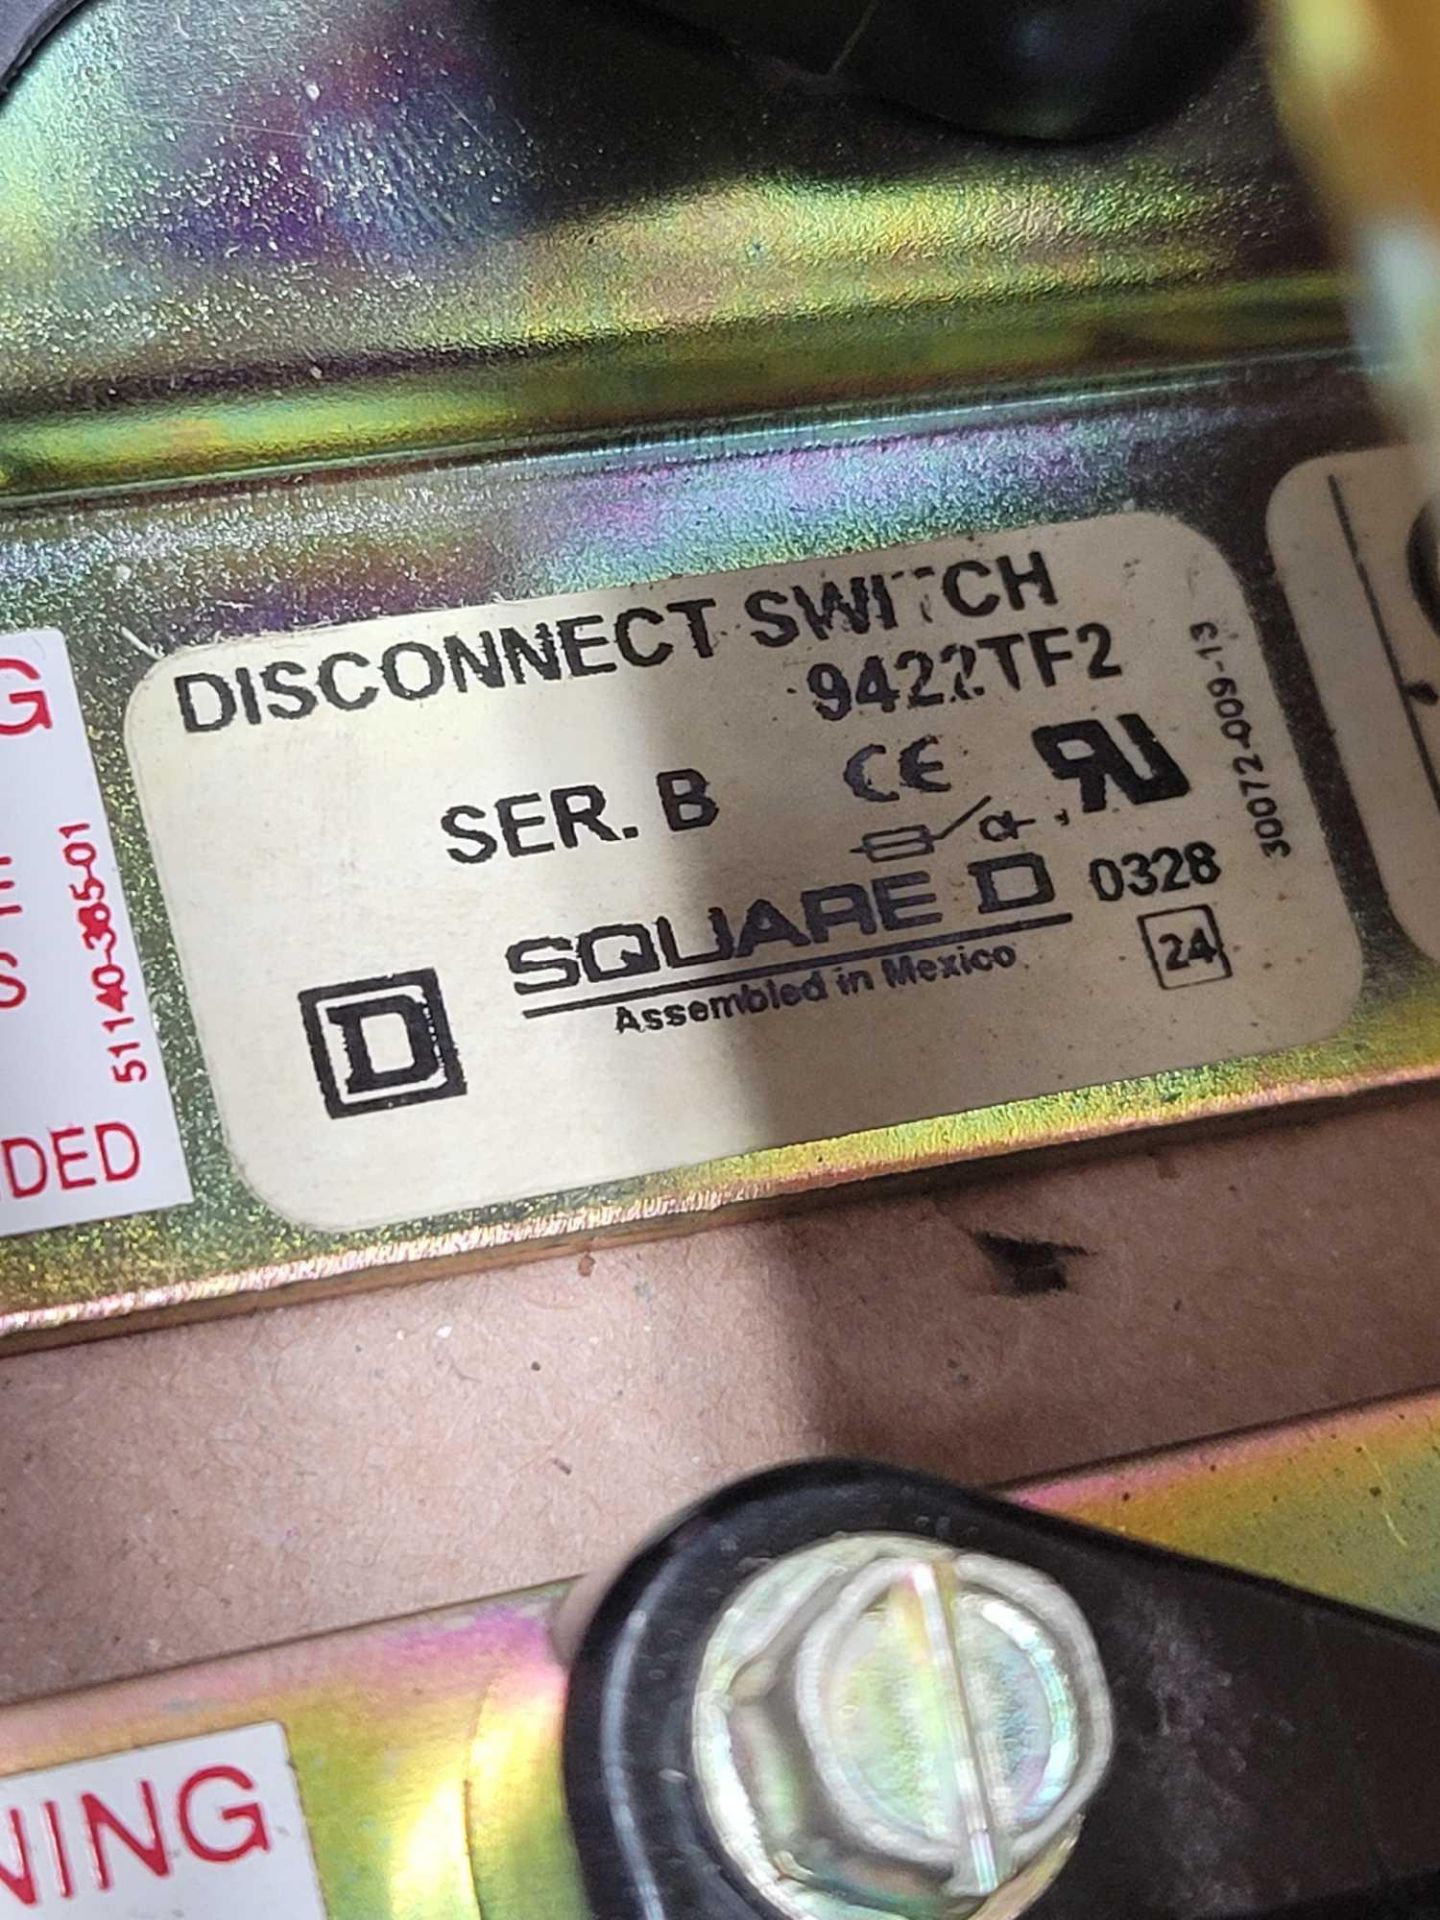 SQUARE D 9422TF2 / Series B Disconnect Switch with Operating Handle - Image 2 of 8